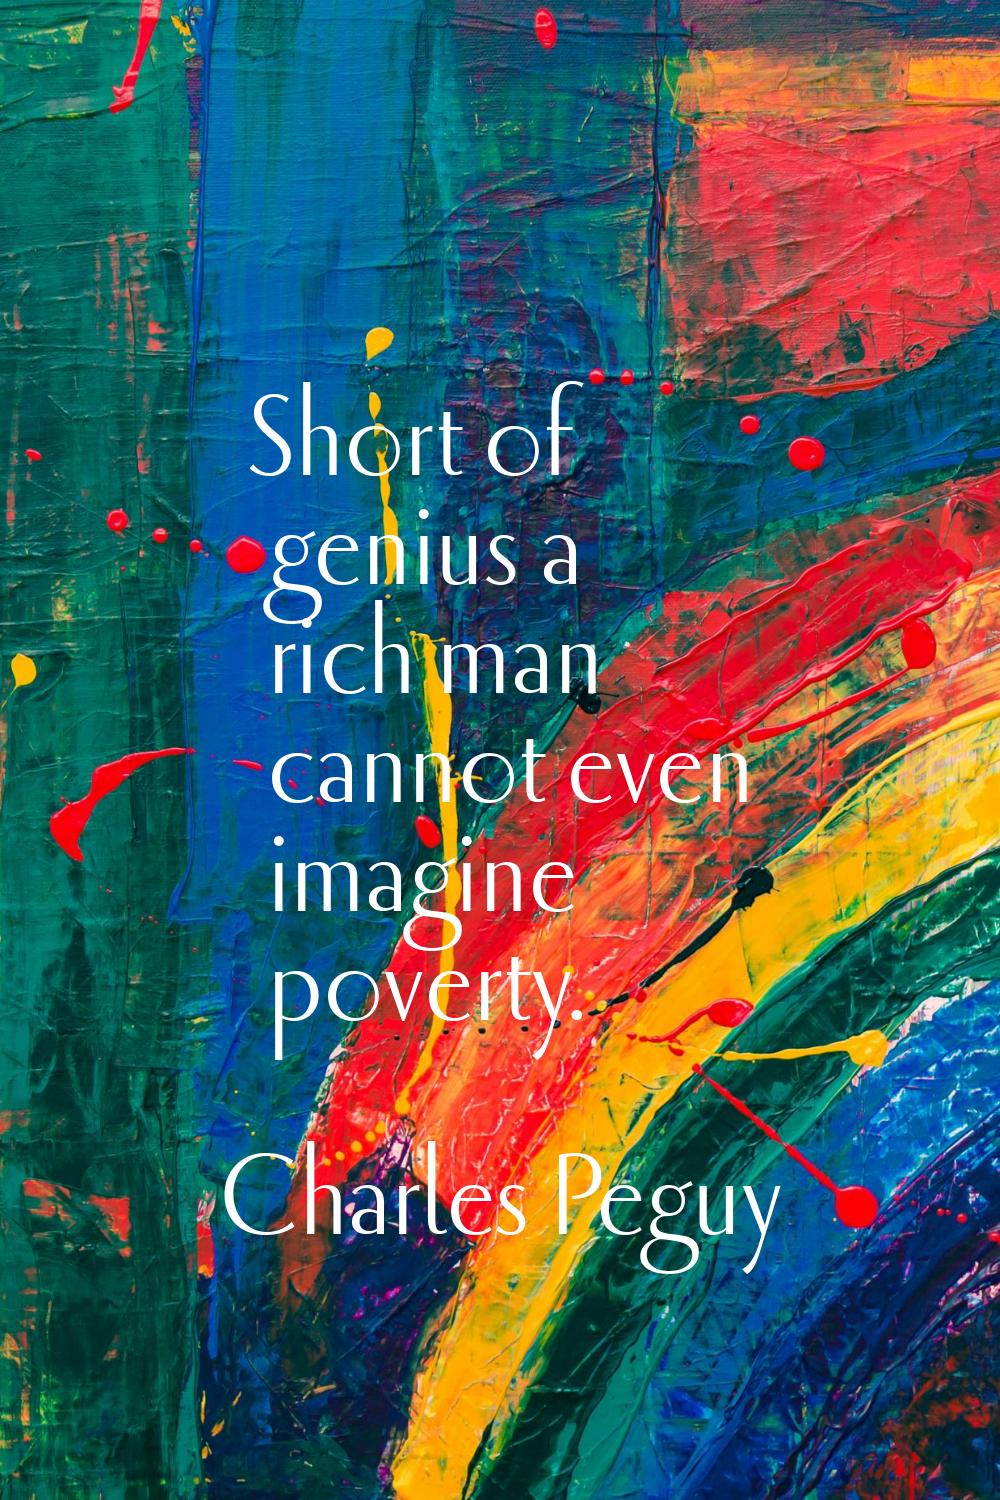 Short of genius a rich man cannot even imagine poverty.